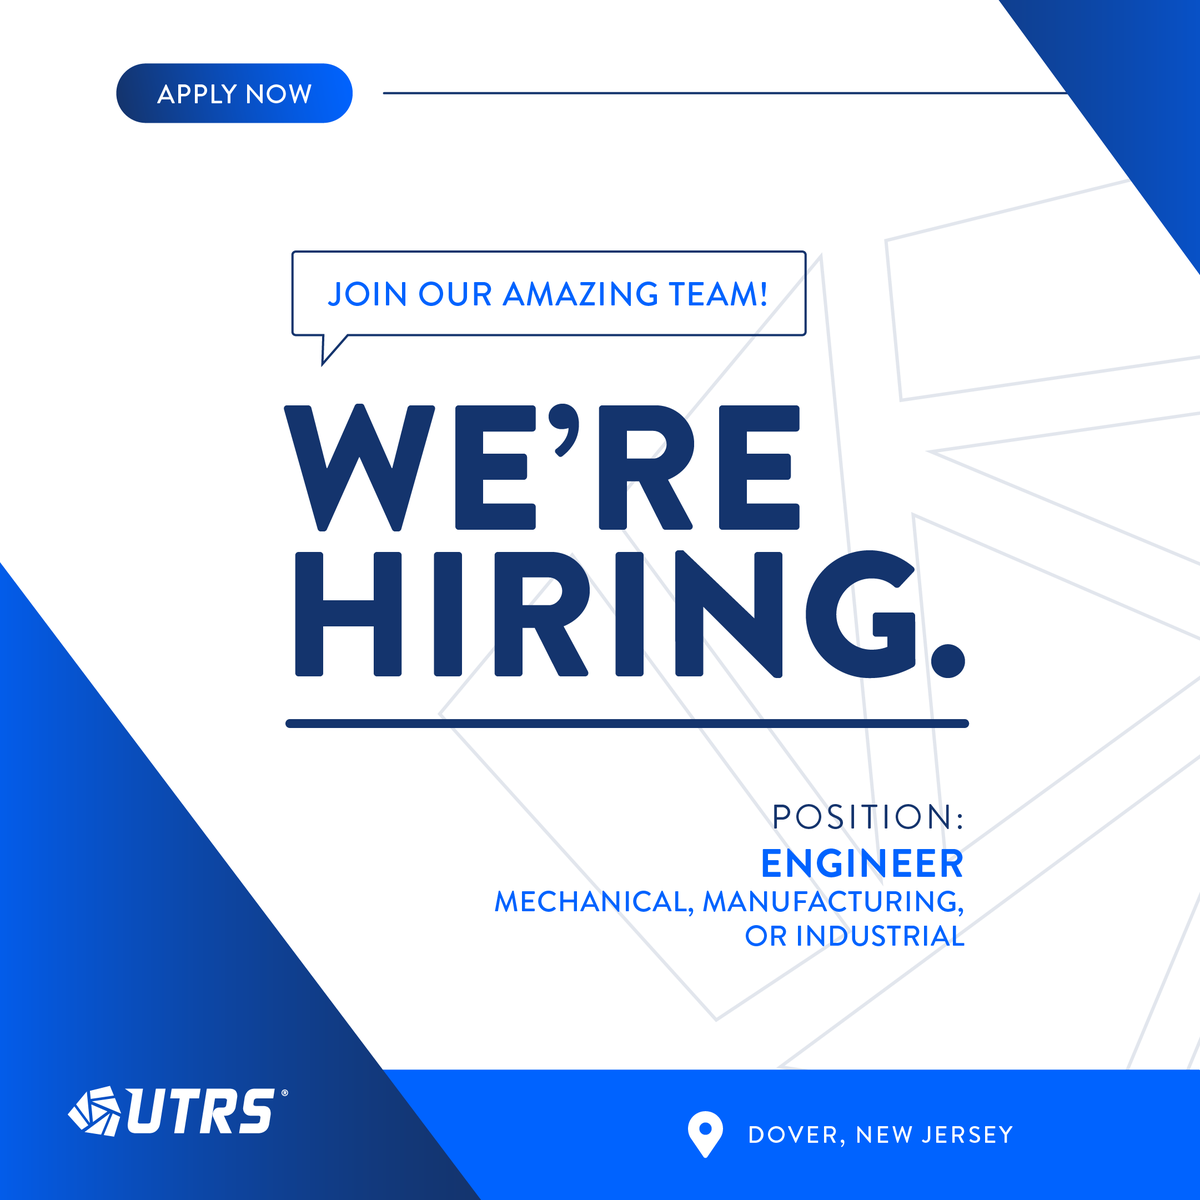 Are you looking to make a move in your career? 💼 Are you an Engineer – Mechanical, Manufacturing, or Industrial? Our innovative team is expanding! View and apply now: bit.ly/3JkRfy1 #careers #jobsearch #NJjobs #UTRS #engineer #mechanical #manufacturing #industrial